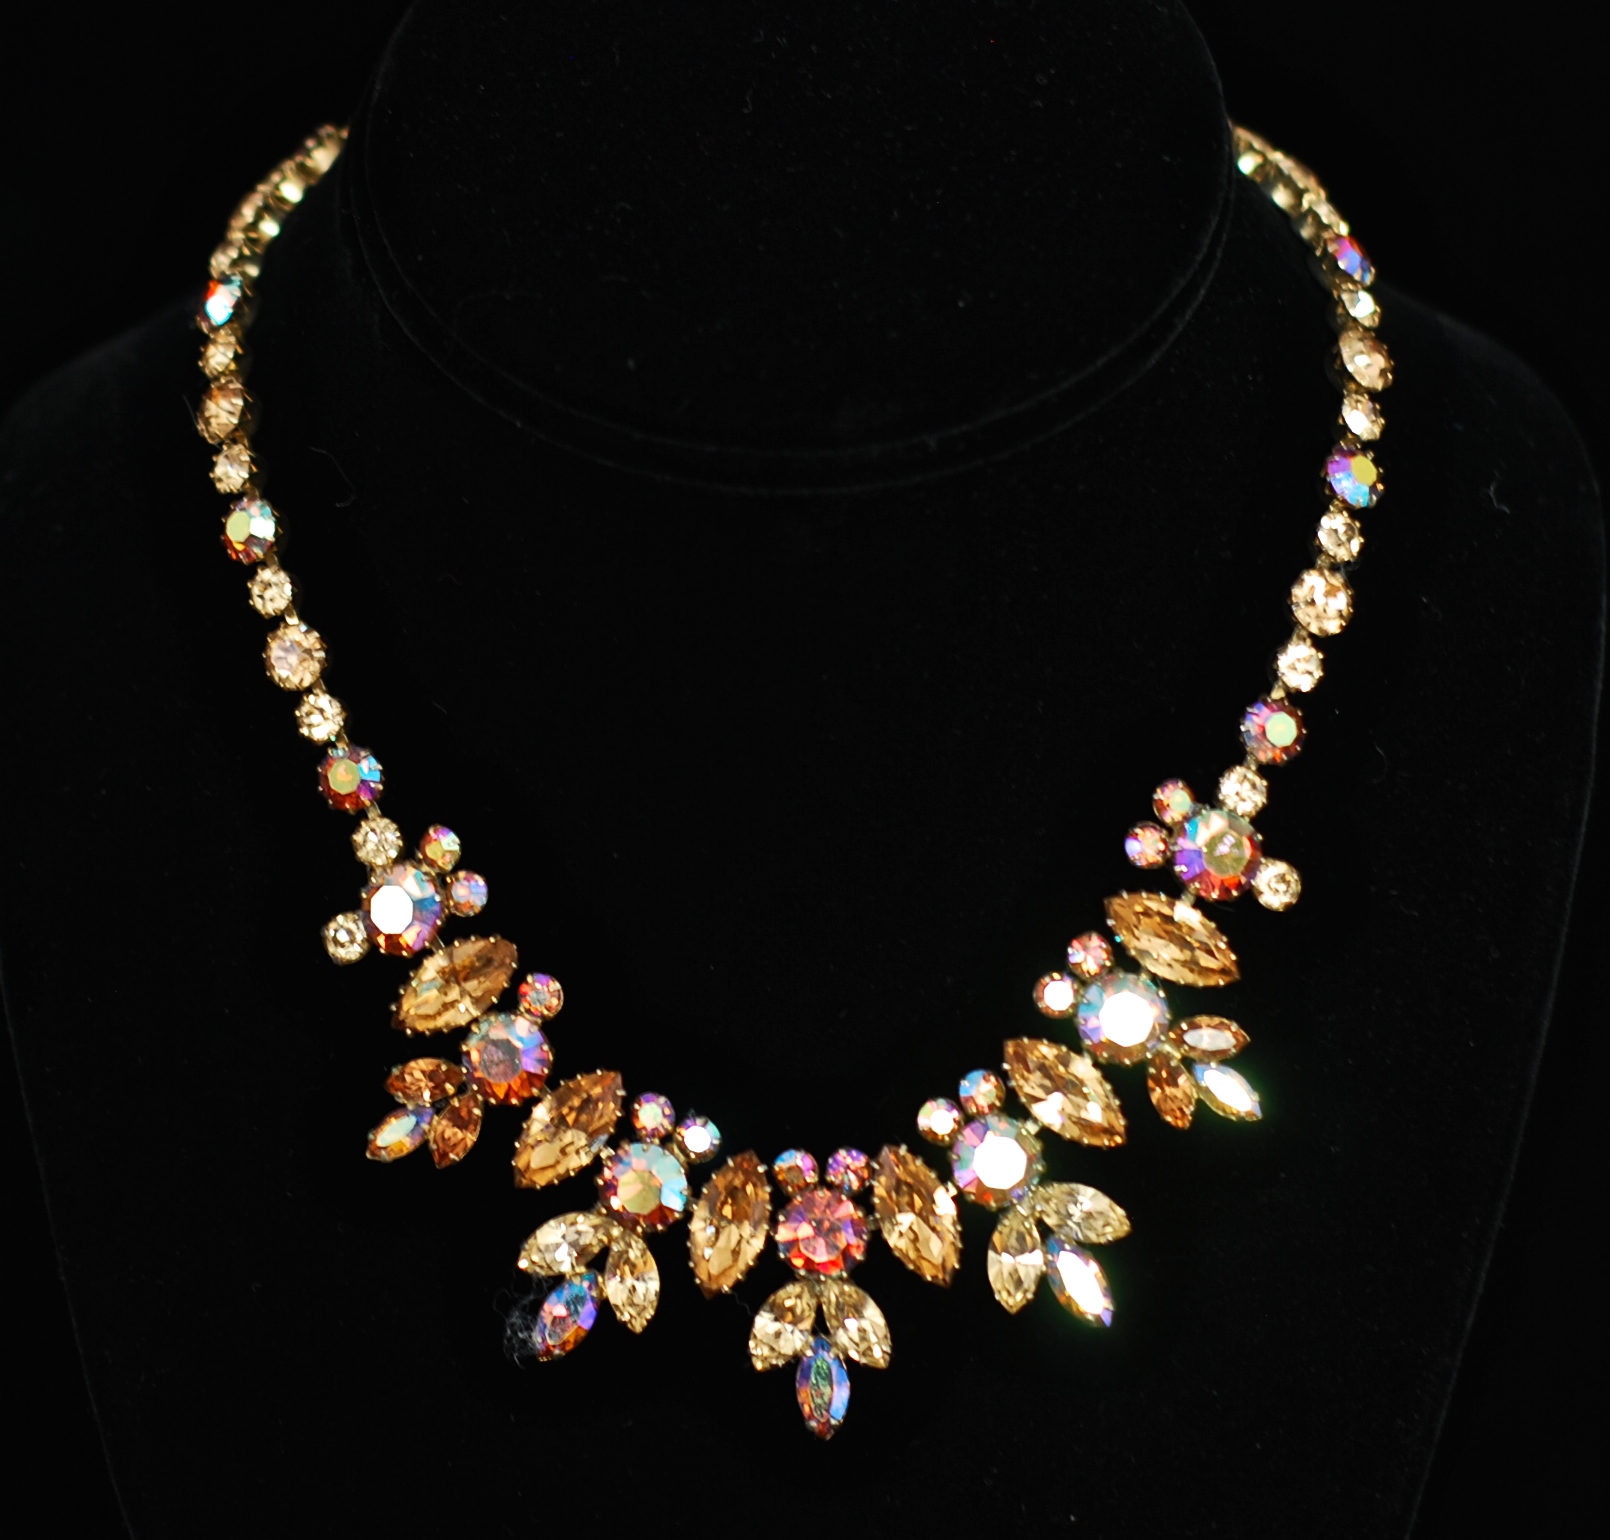 Sherman Stunning Vintage Necklace In Pink Tones – Signed | QUIET WEST